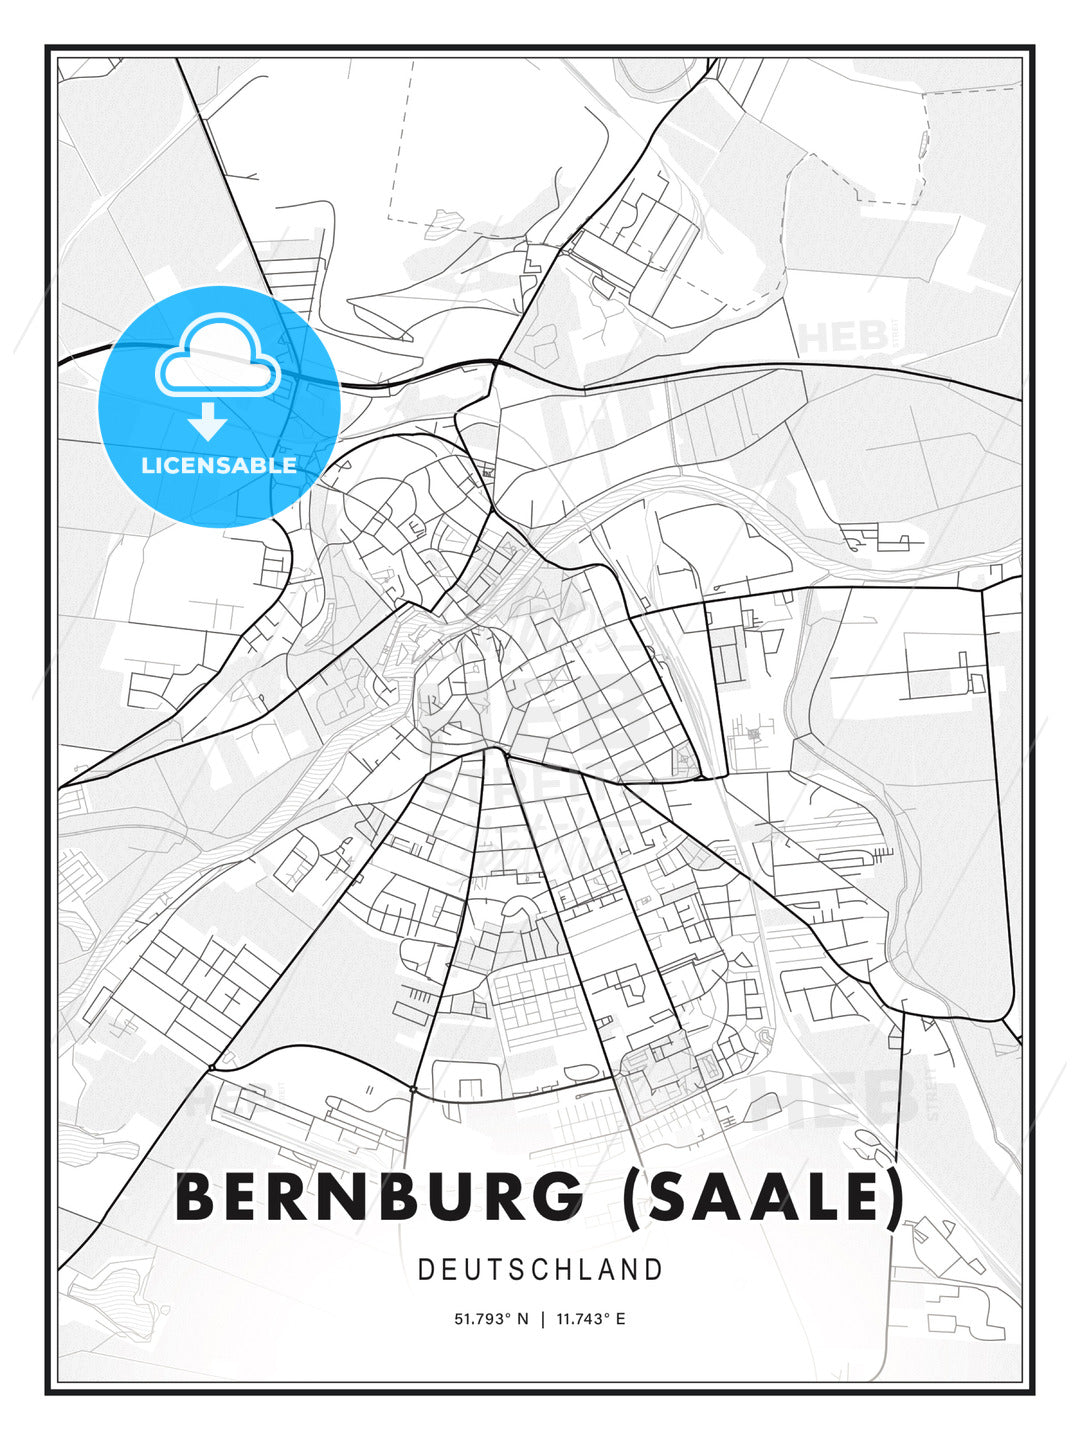 Bernburg (Saale), Germany, Modern Print Template in Various Formats - HEBSTREITS Sketches